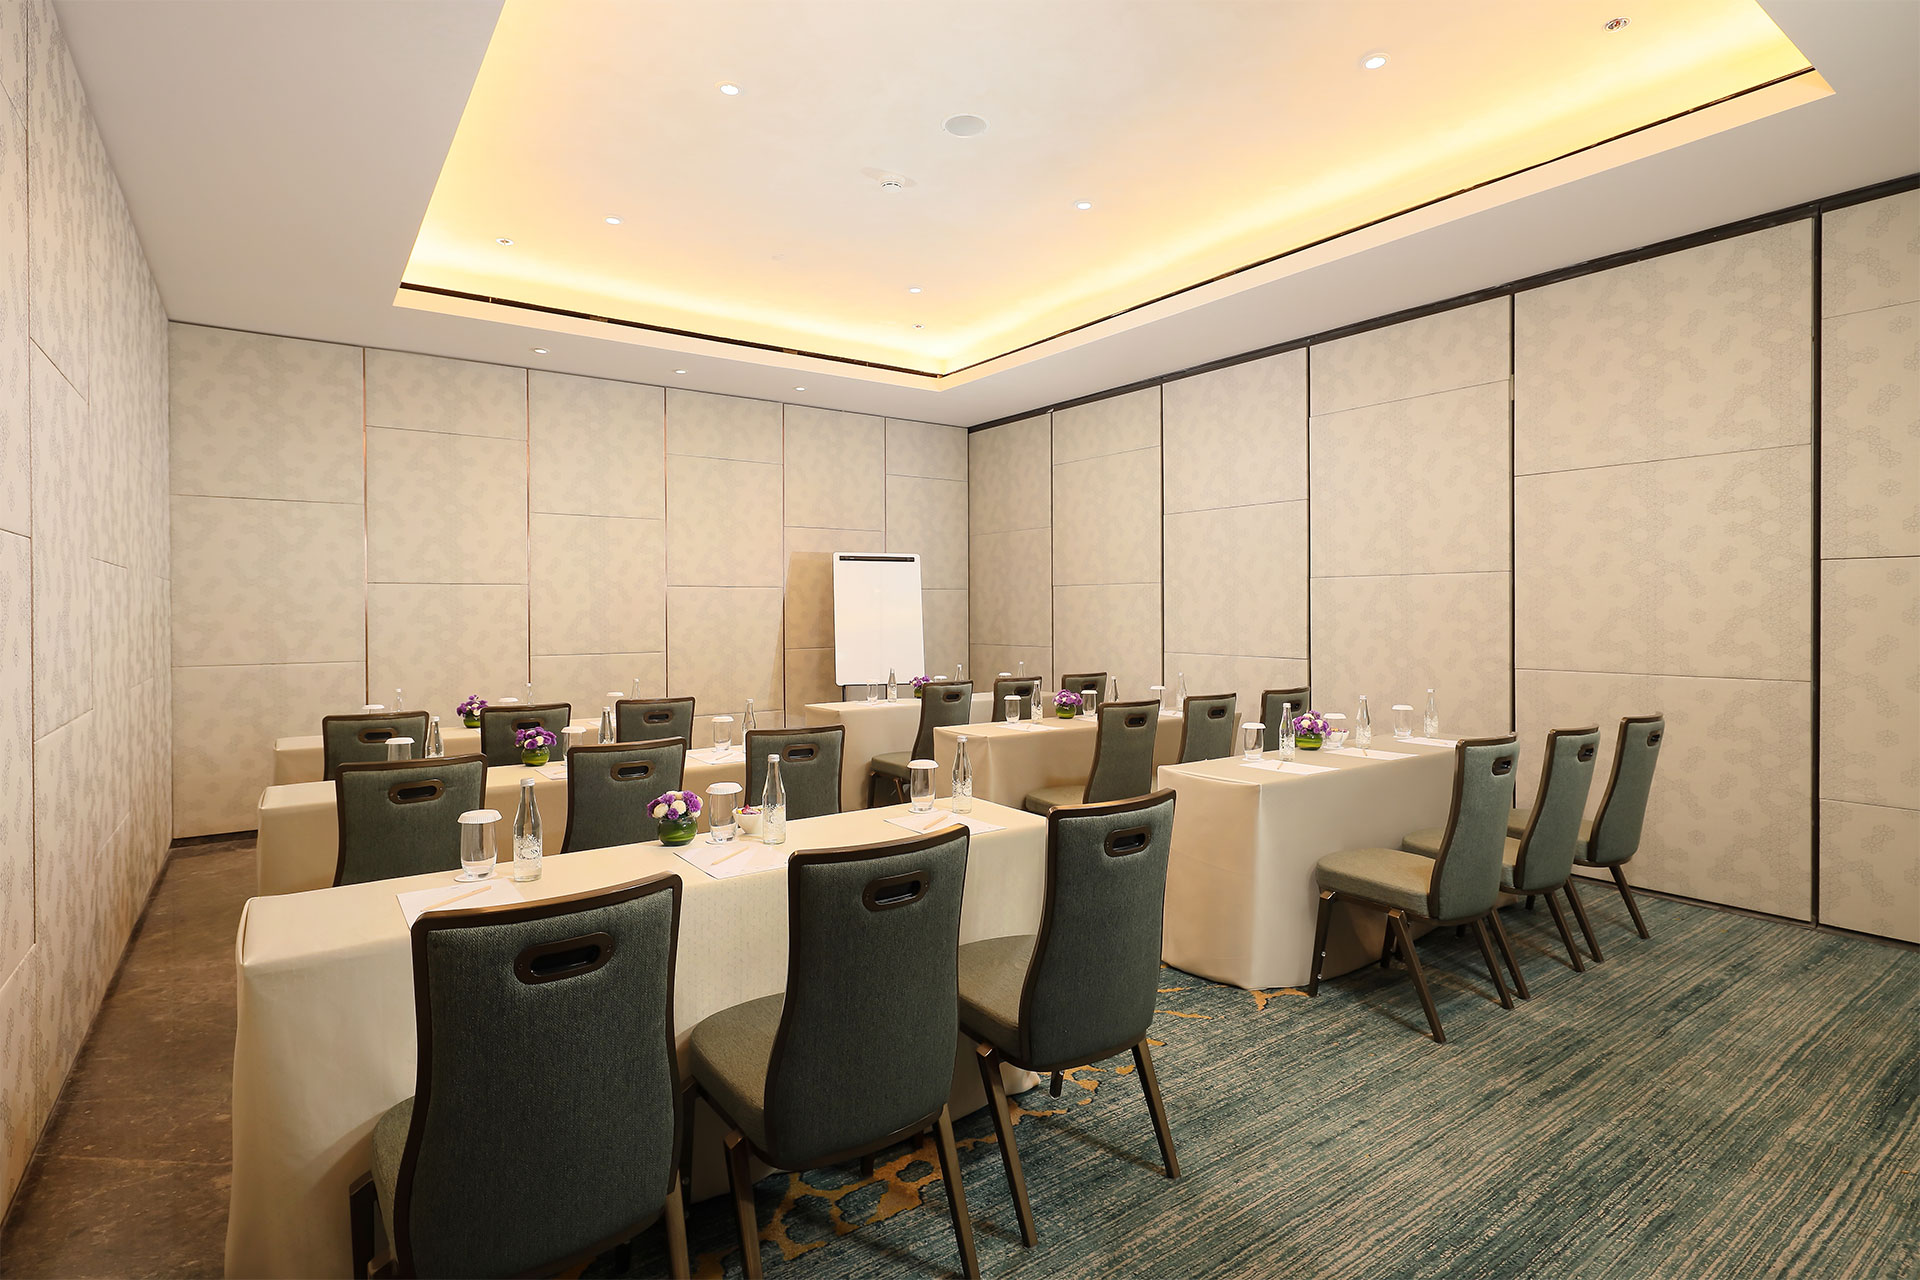 Luxurious indoor venue for meeting and private event with classroom set up